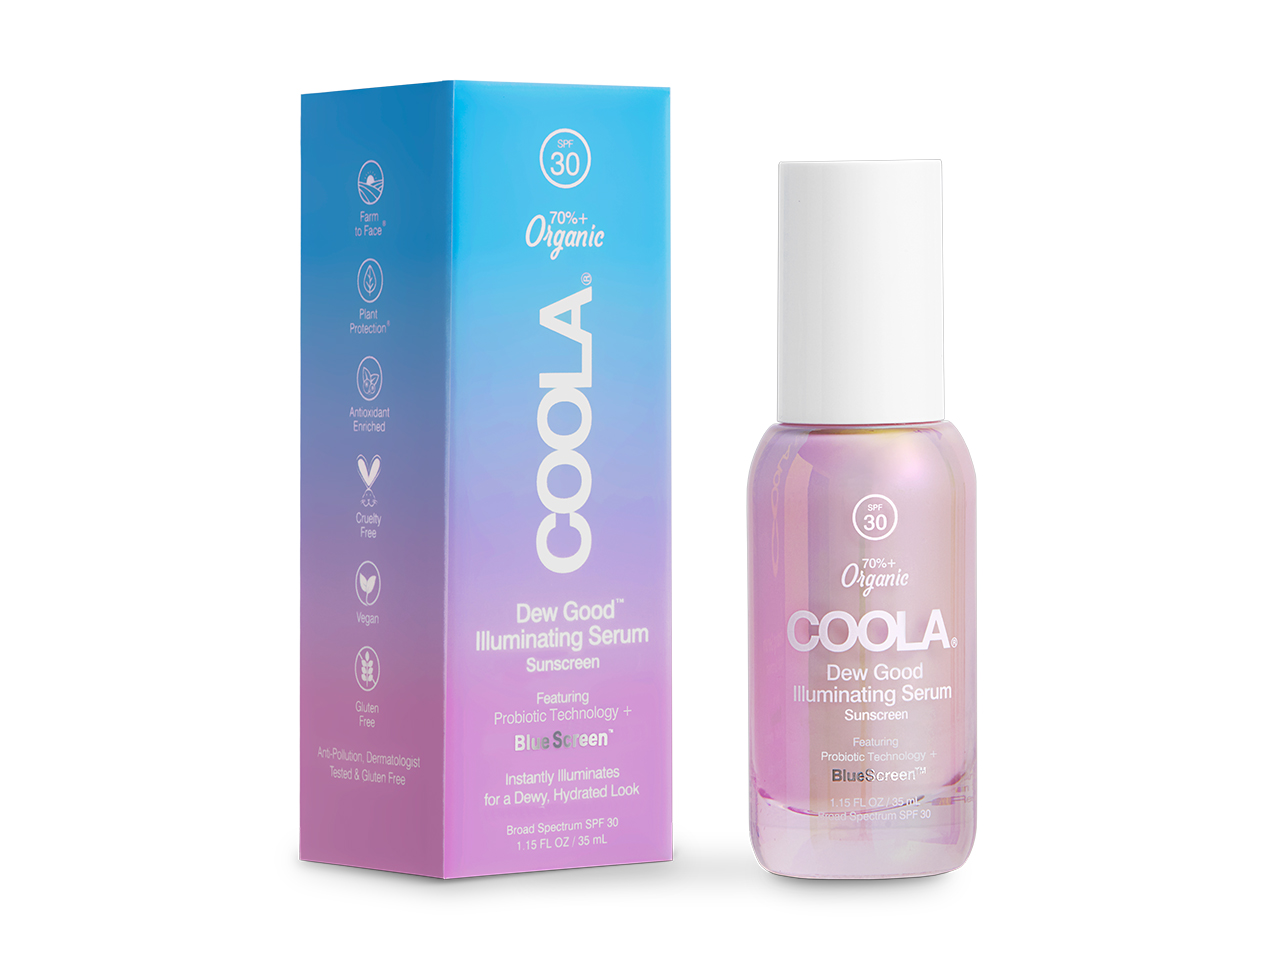 Coola A purple pearlescent bottle next to a box of Dew Good Illuminating Serum Face SPF 30 sunscreen.